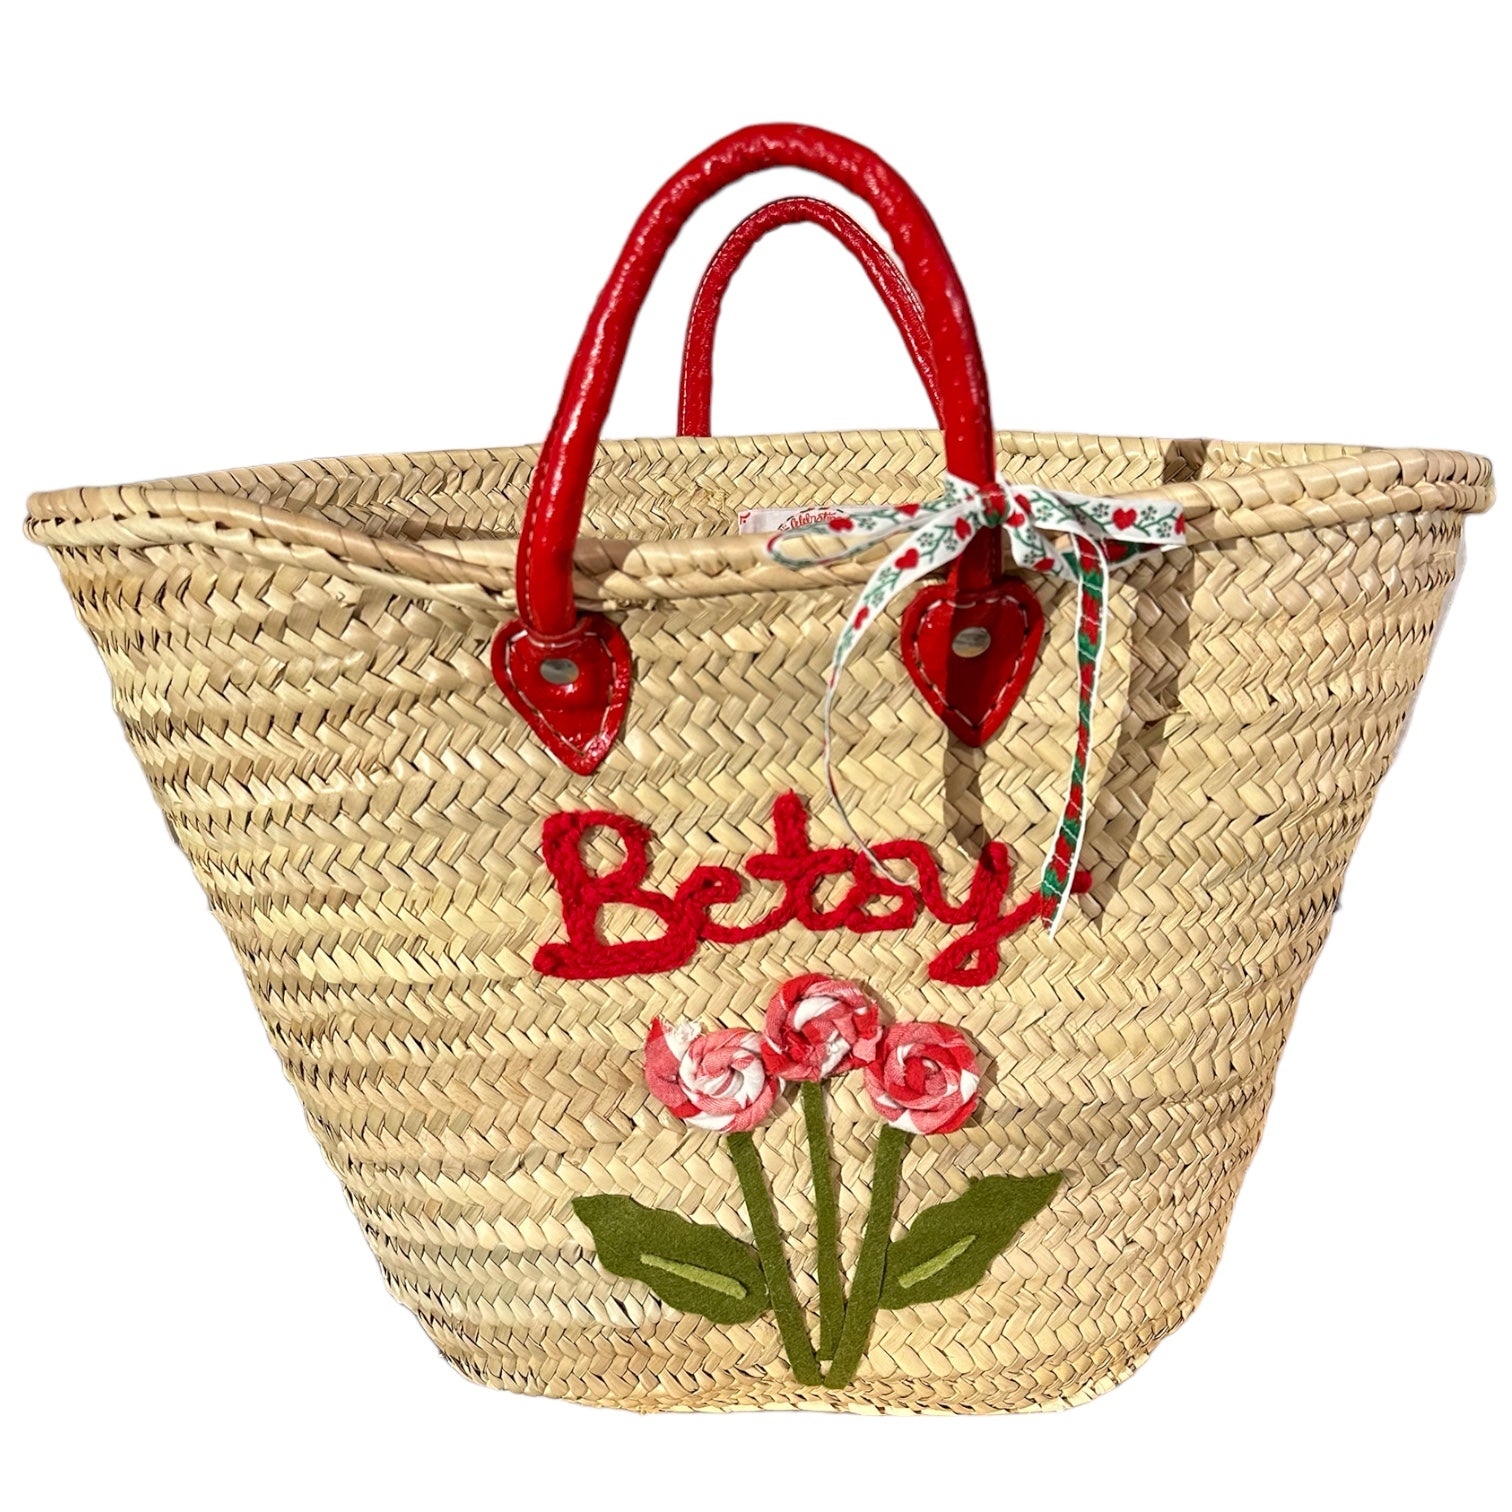 Big Embroidered Bag / Basket / French Market Basket / Straw Basket - red - Premium  from Tricia Lowenfield Design 